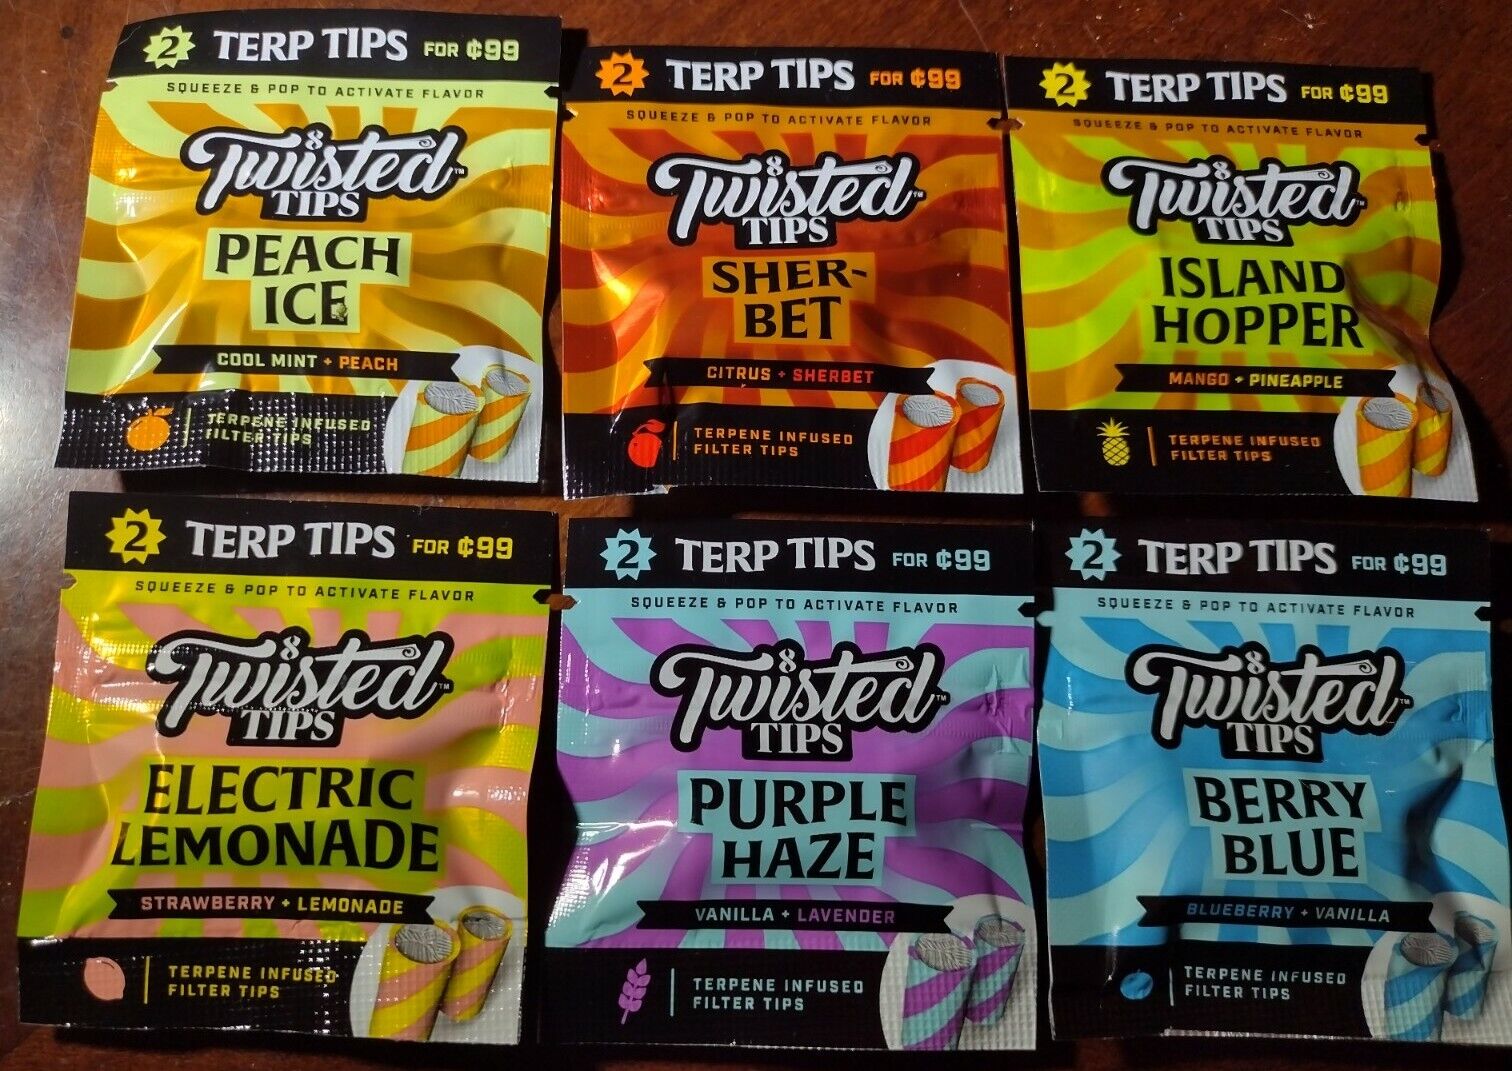 Twisted Hemp Flavored Filter Tips Variety Sampler 6/2ct Packs=12pc Twisted Hemp